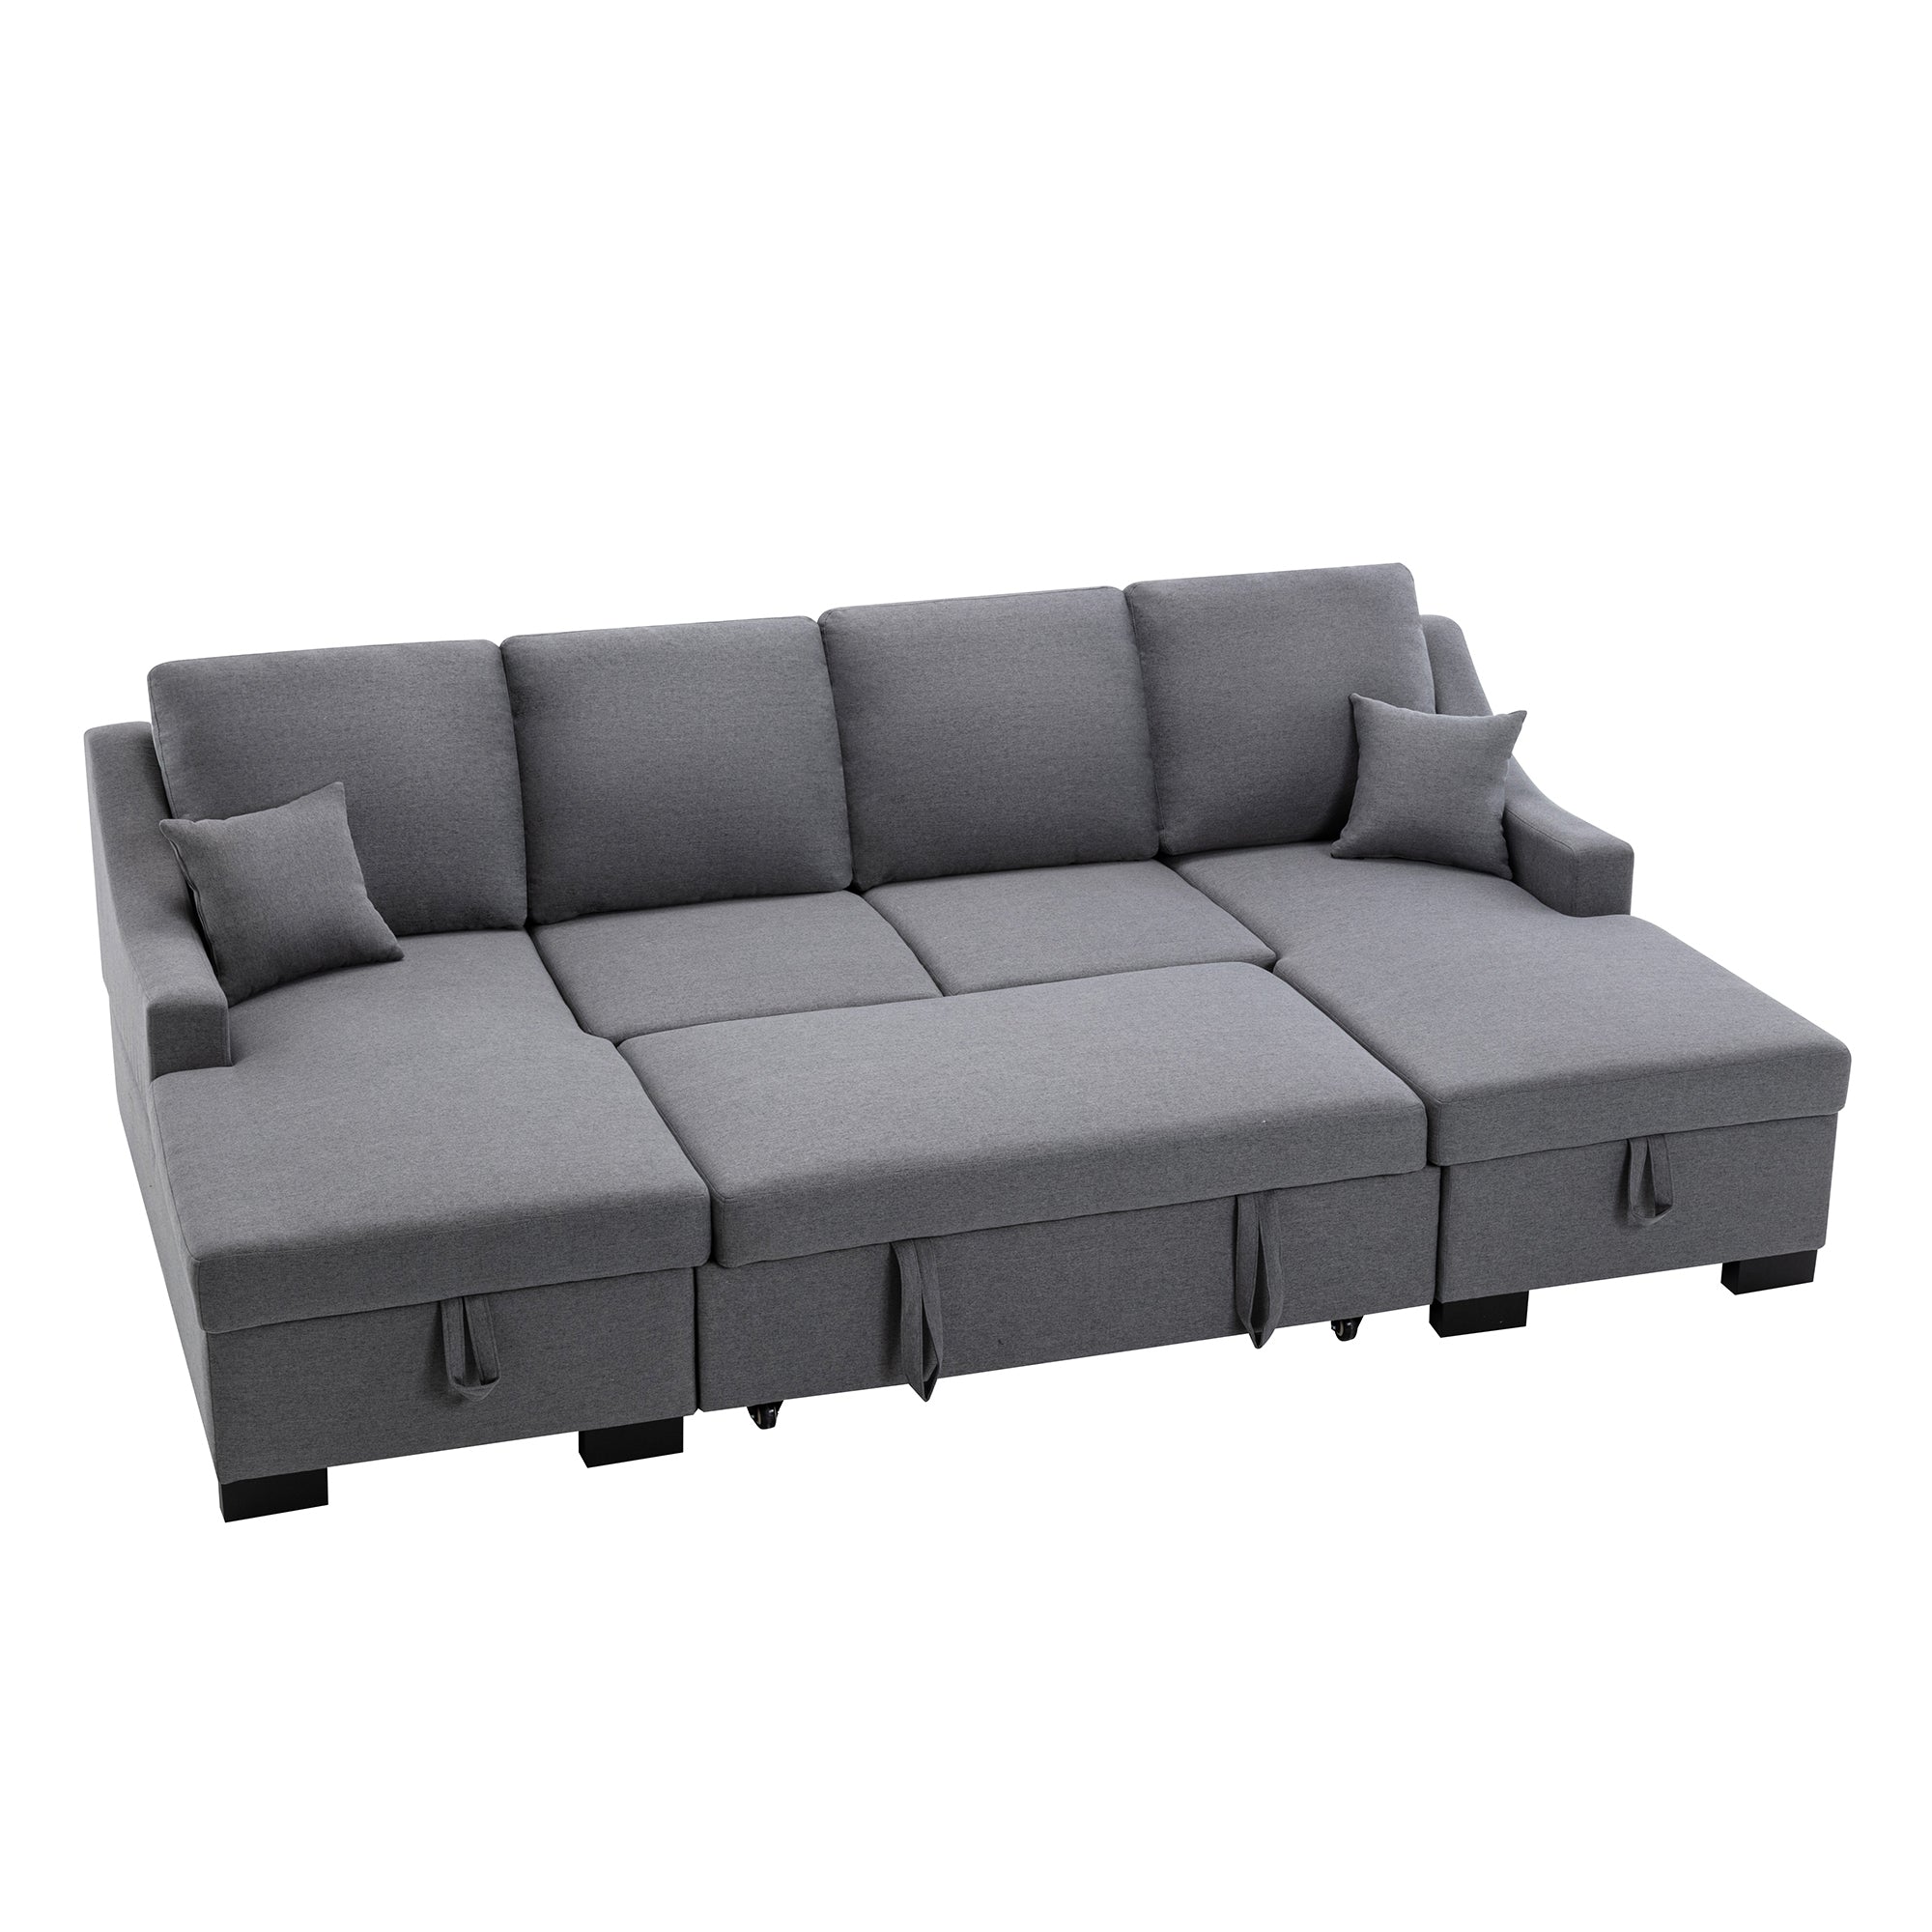 U-Style Upholstery Sleeper Sectional Sofa with Double Storage Spaces, 2 Tossing Cushions, Grey | Comfortable and Functional Addition to Your Living Space-Sleeper Sectionals-American Furniture Outlet